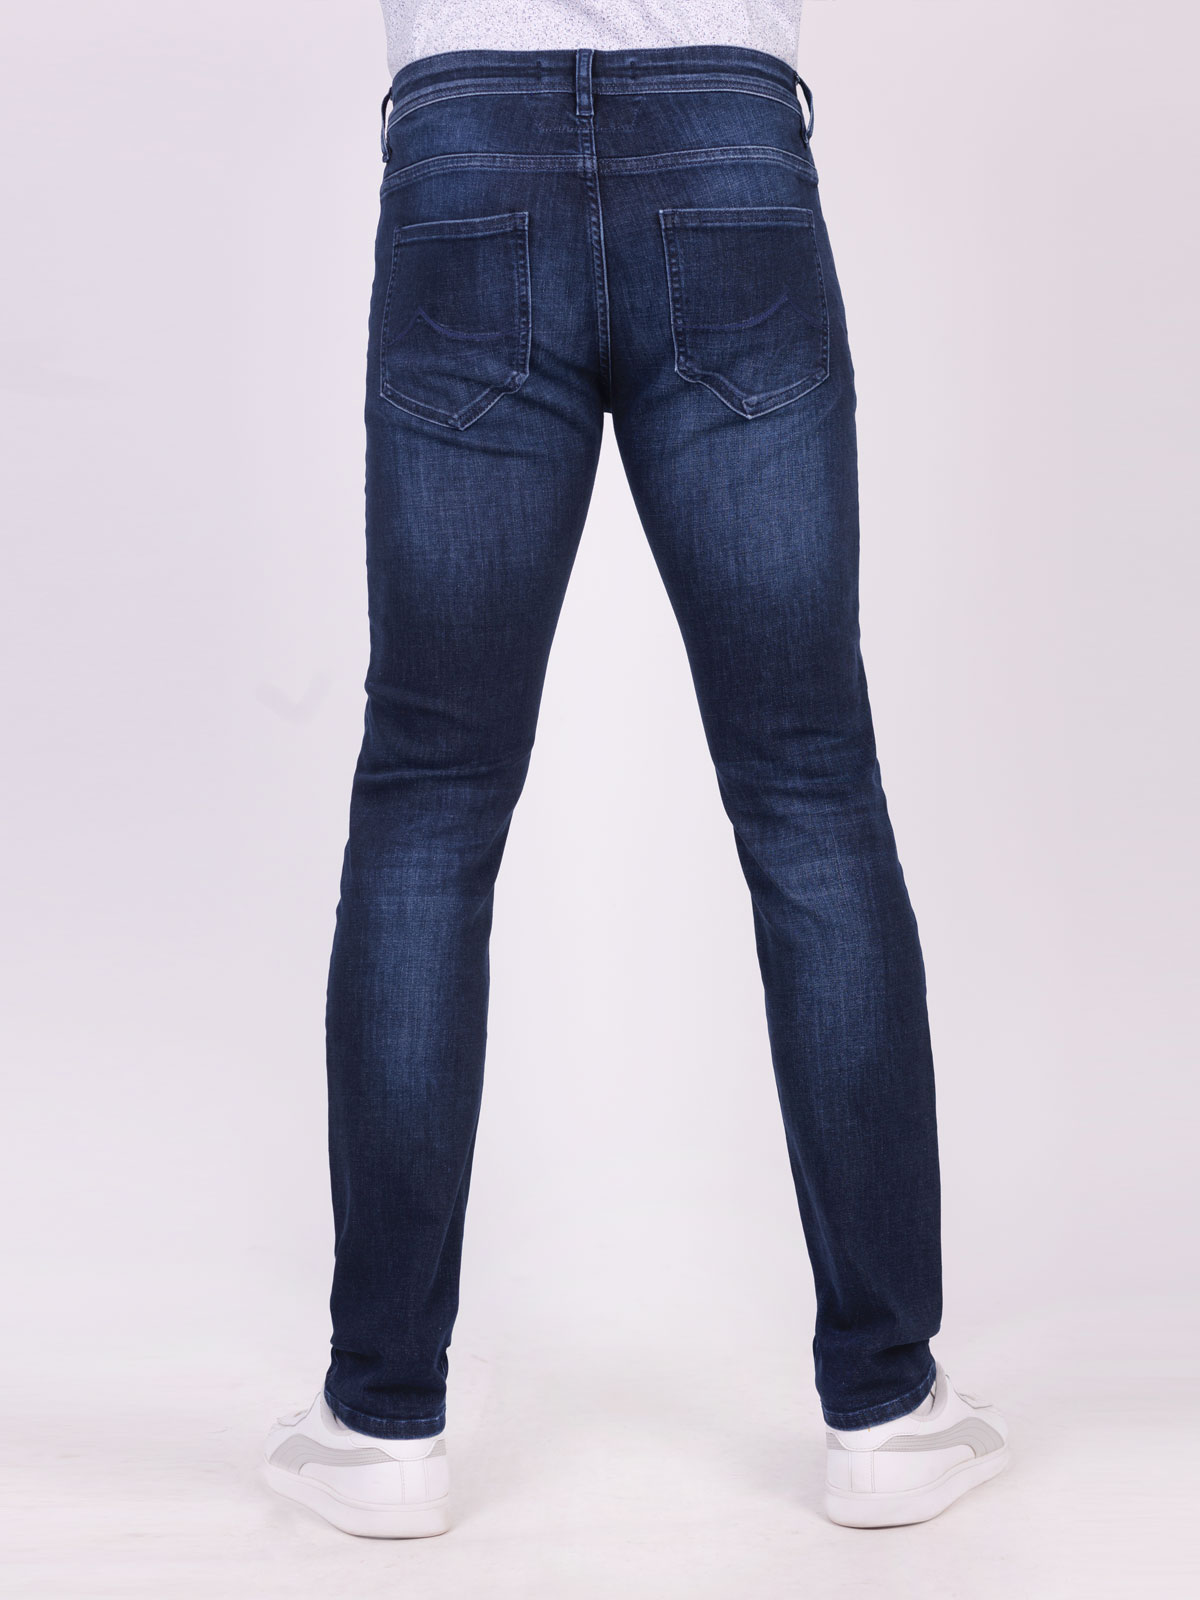 Mens jeans in classic blue - 62173 € 78.18 img2